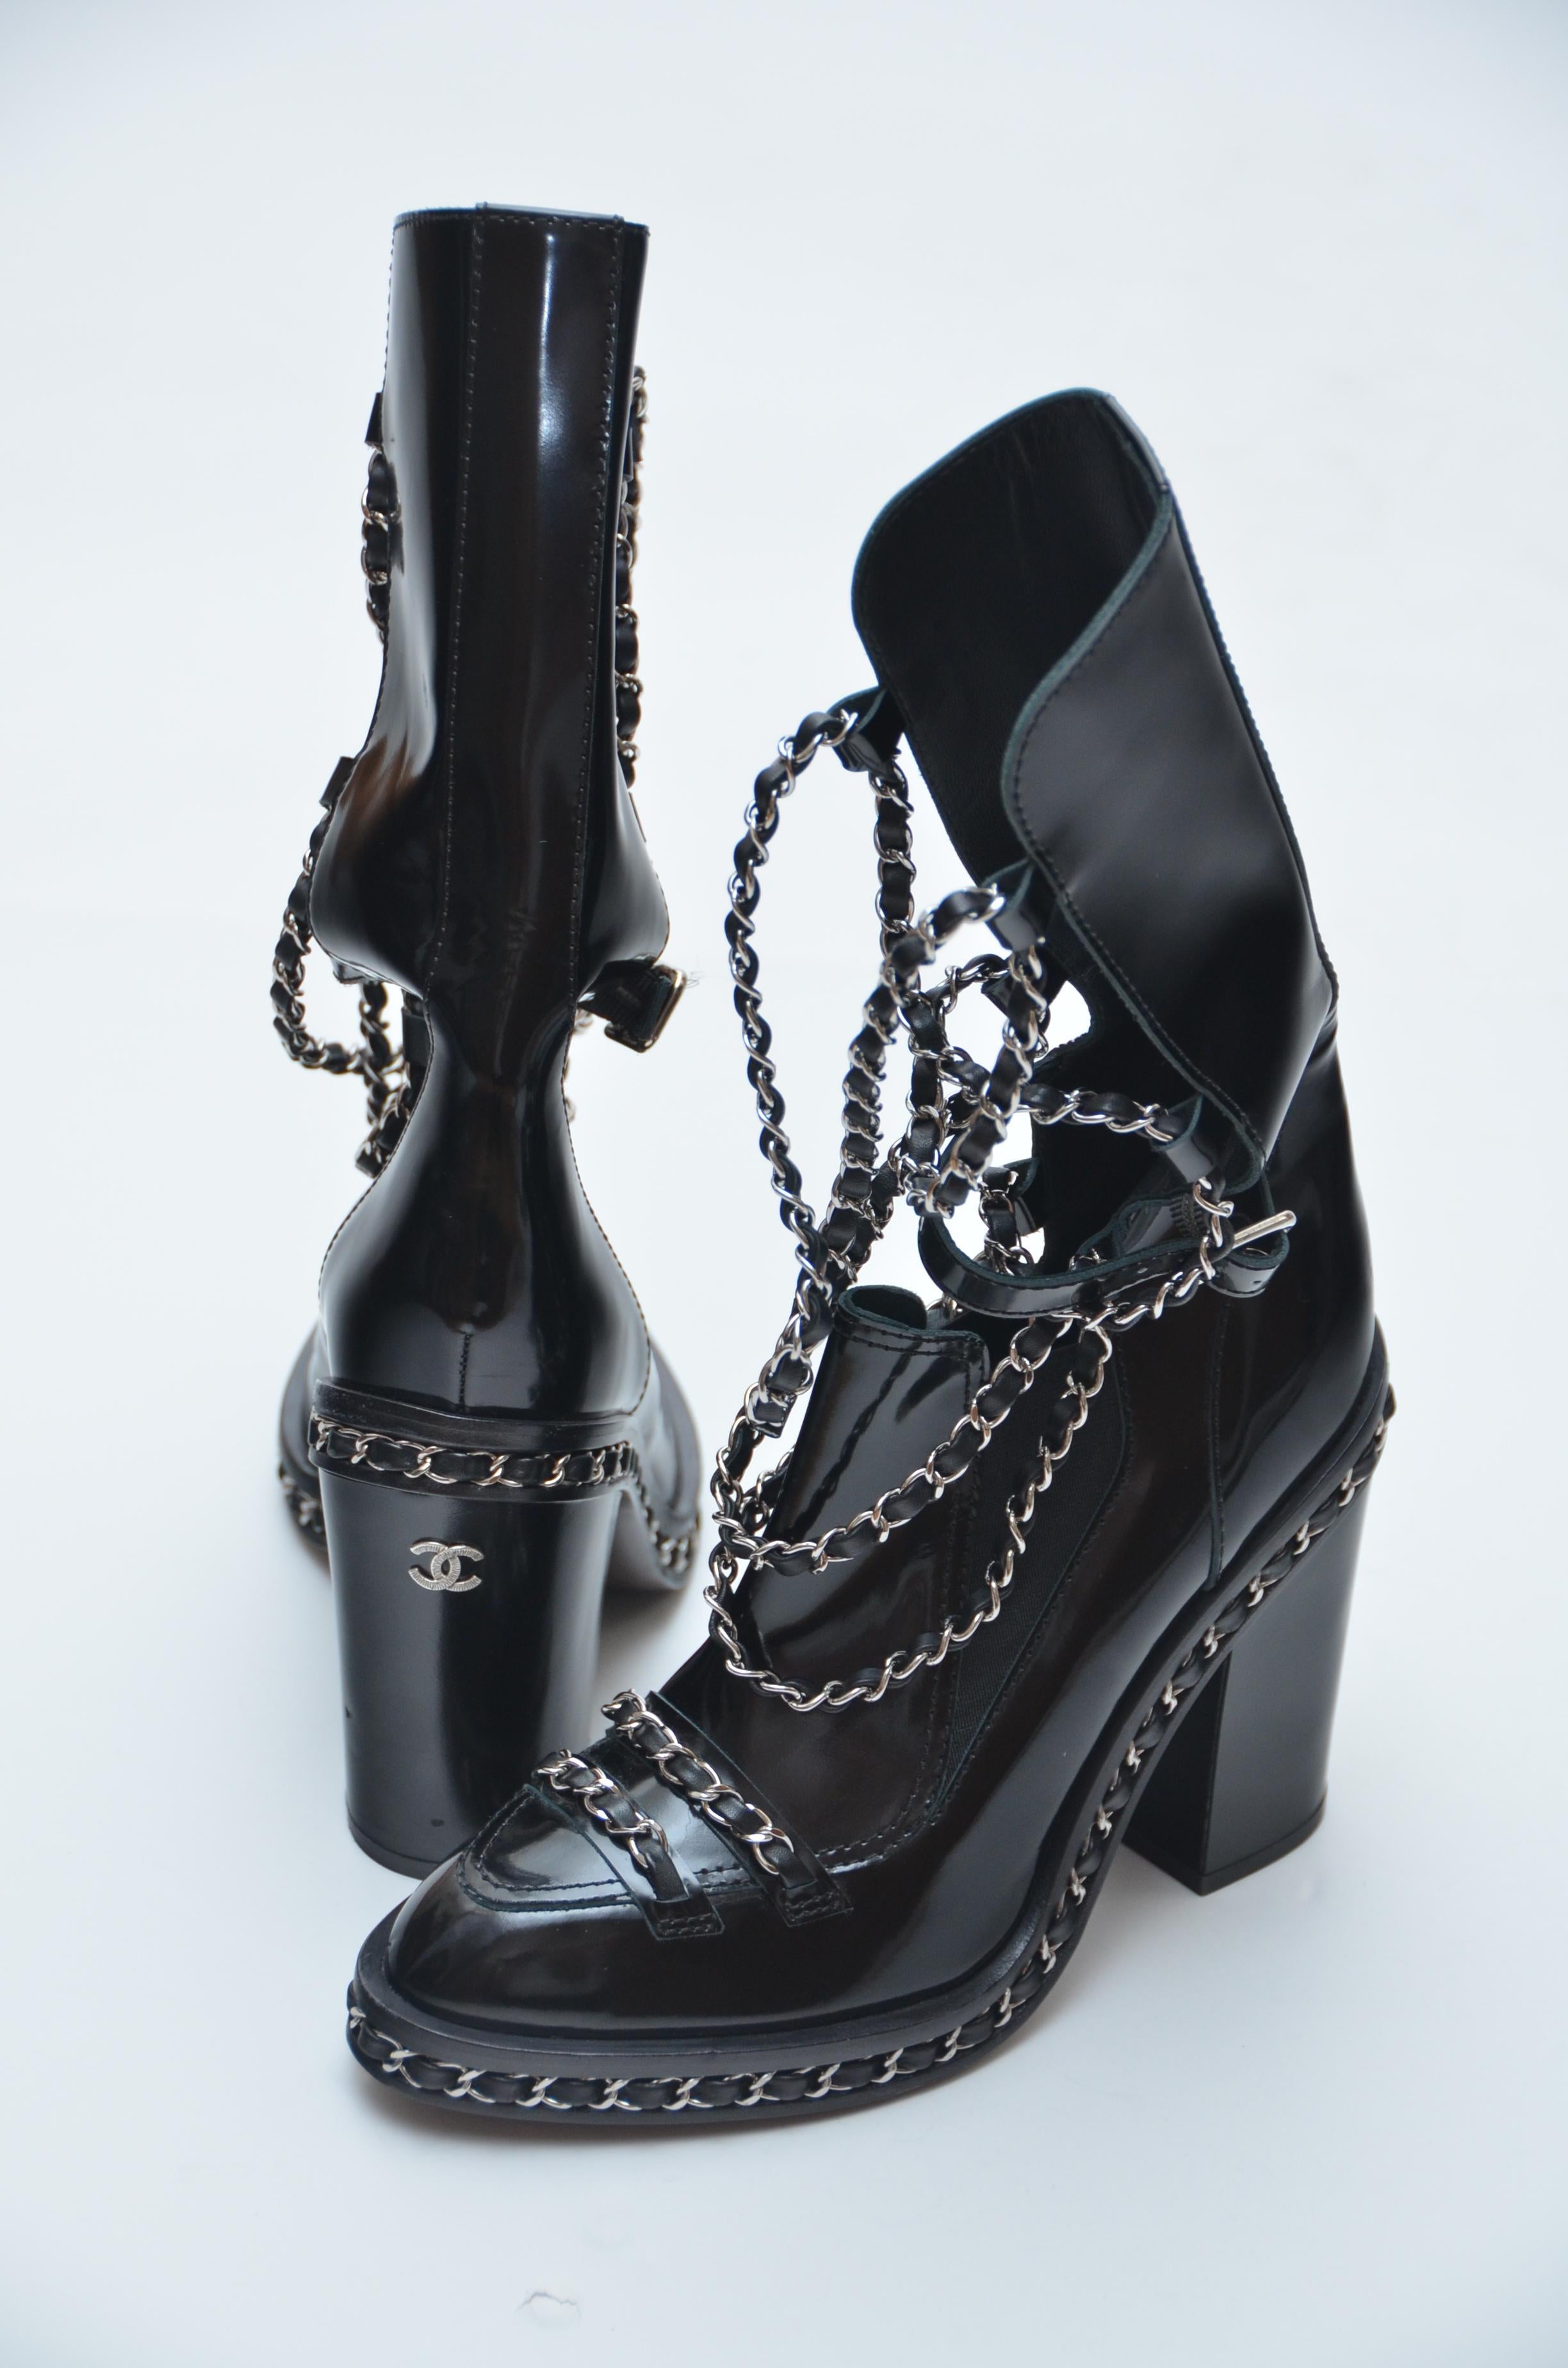 Chanel black chain boots.
Sold out fast and one of the most popular boots from Chanel.
Size 37.5 Please know /familiarize your self with Chanel boots  sizing since these are FINAL SALE  .I believe they run little small.

Excellent condition like New